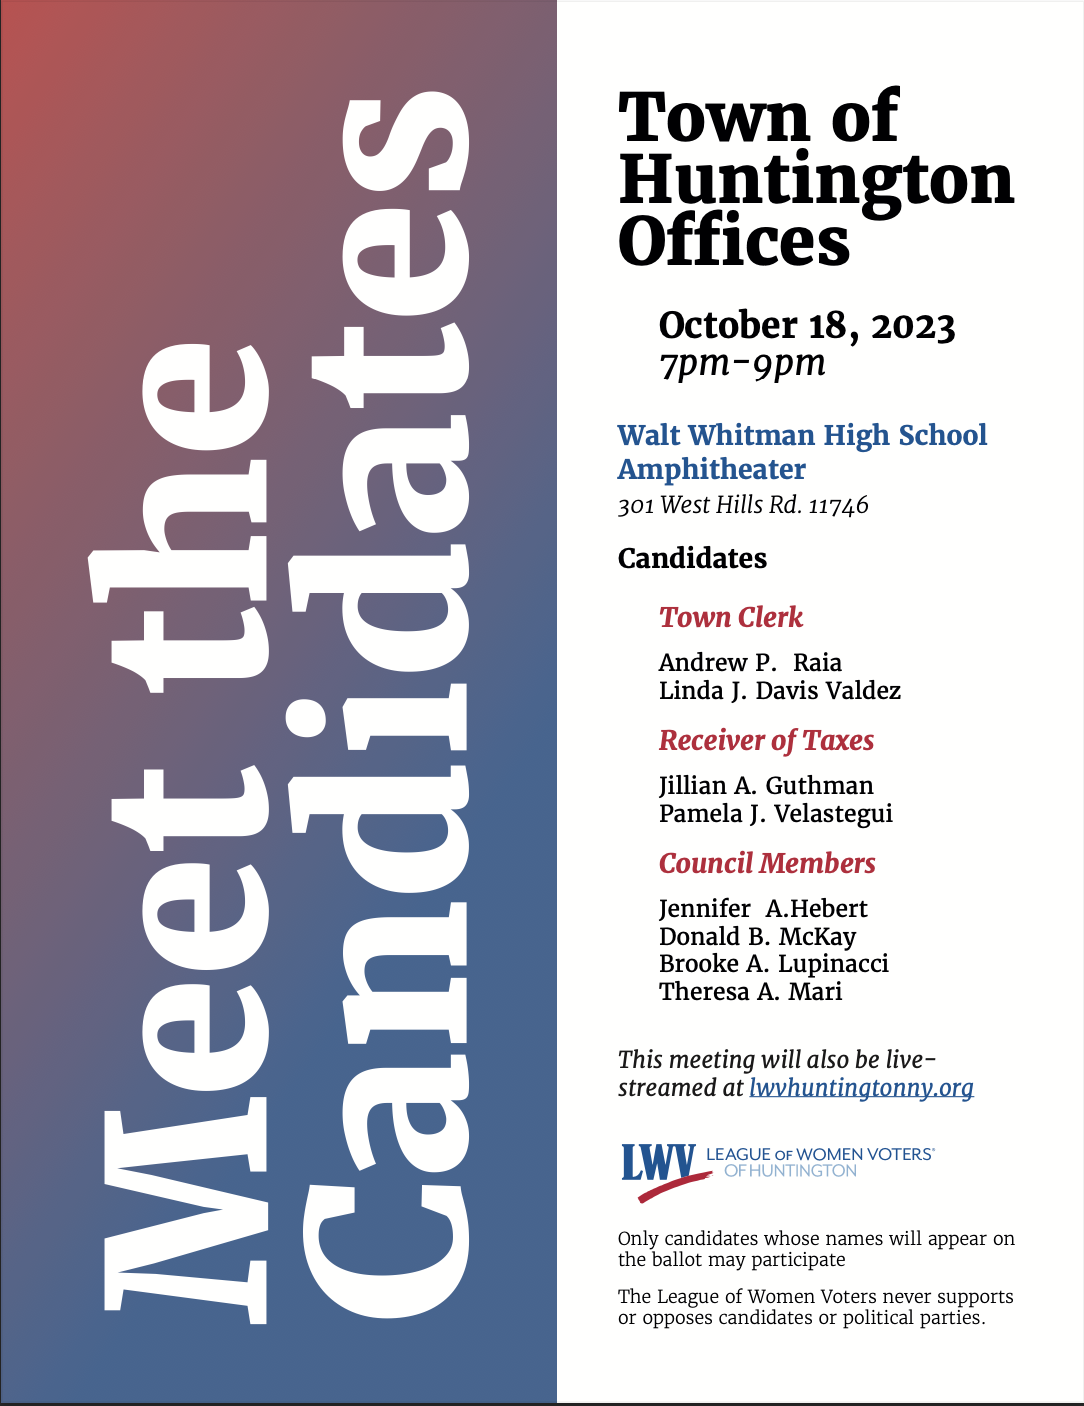 Meet The Candidates Town of Huntington October 18